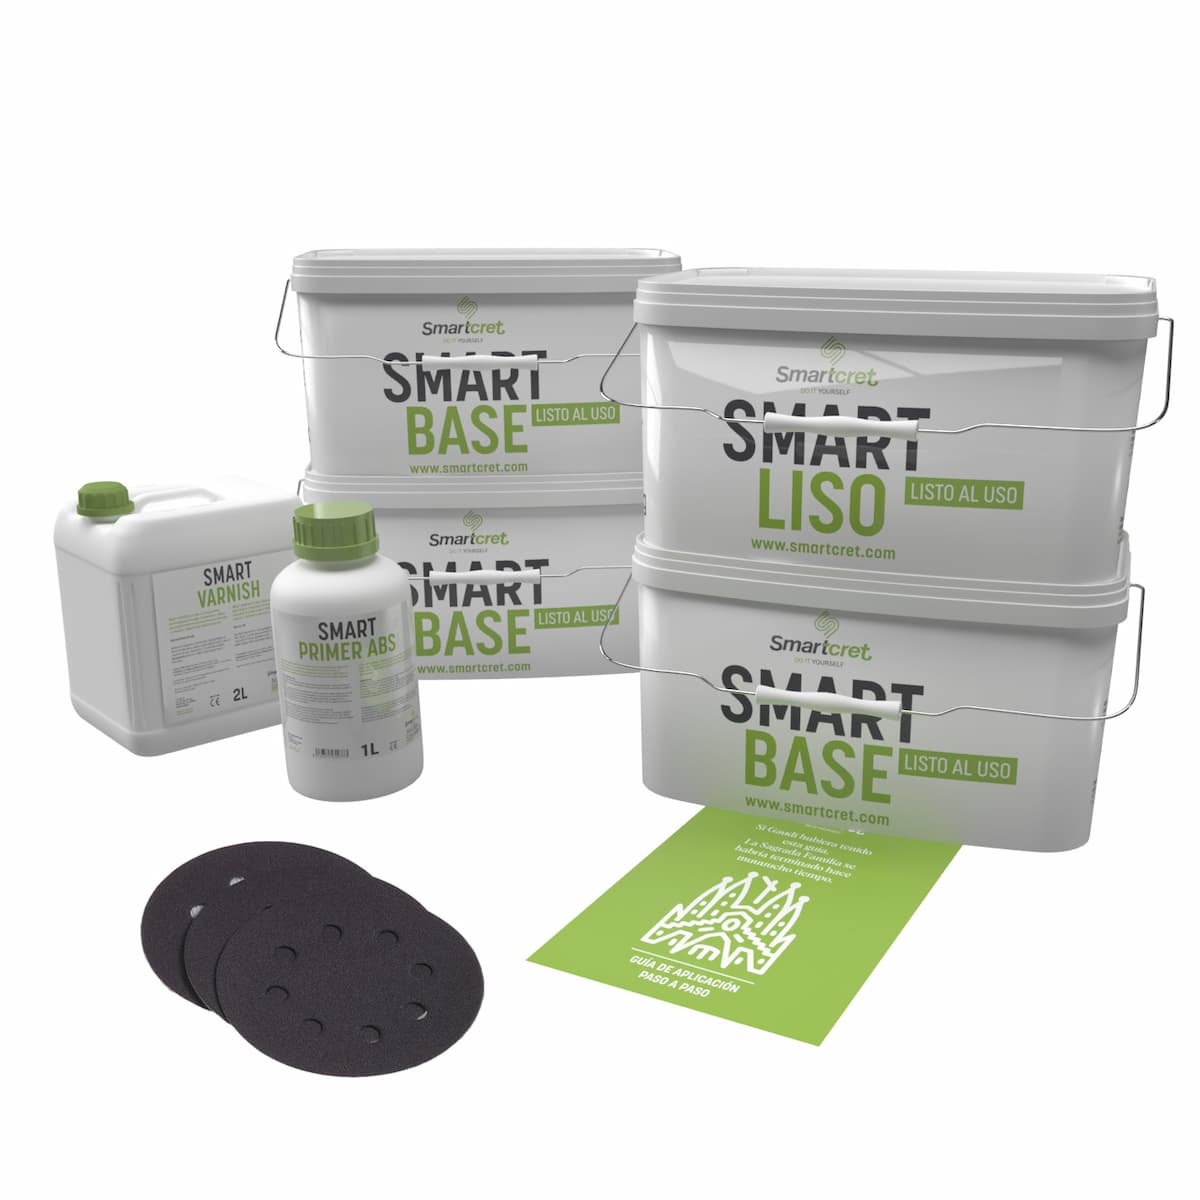 Microcement Smart Kit of 8m2 for absorbent surfaces